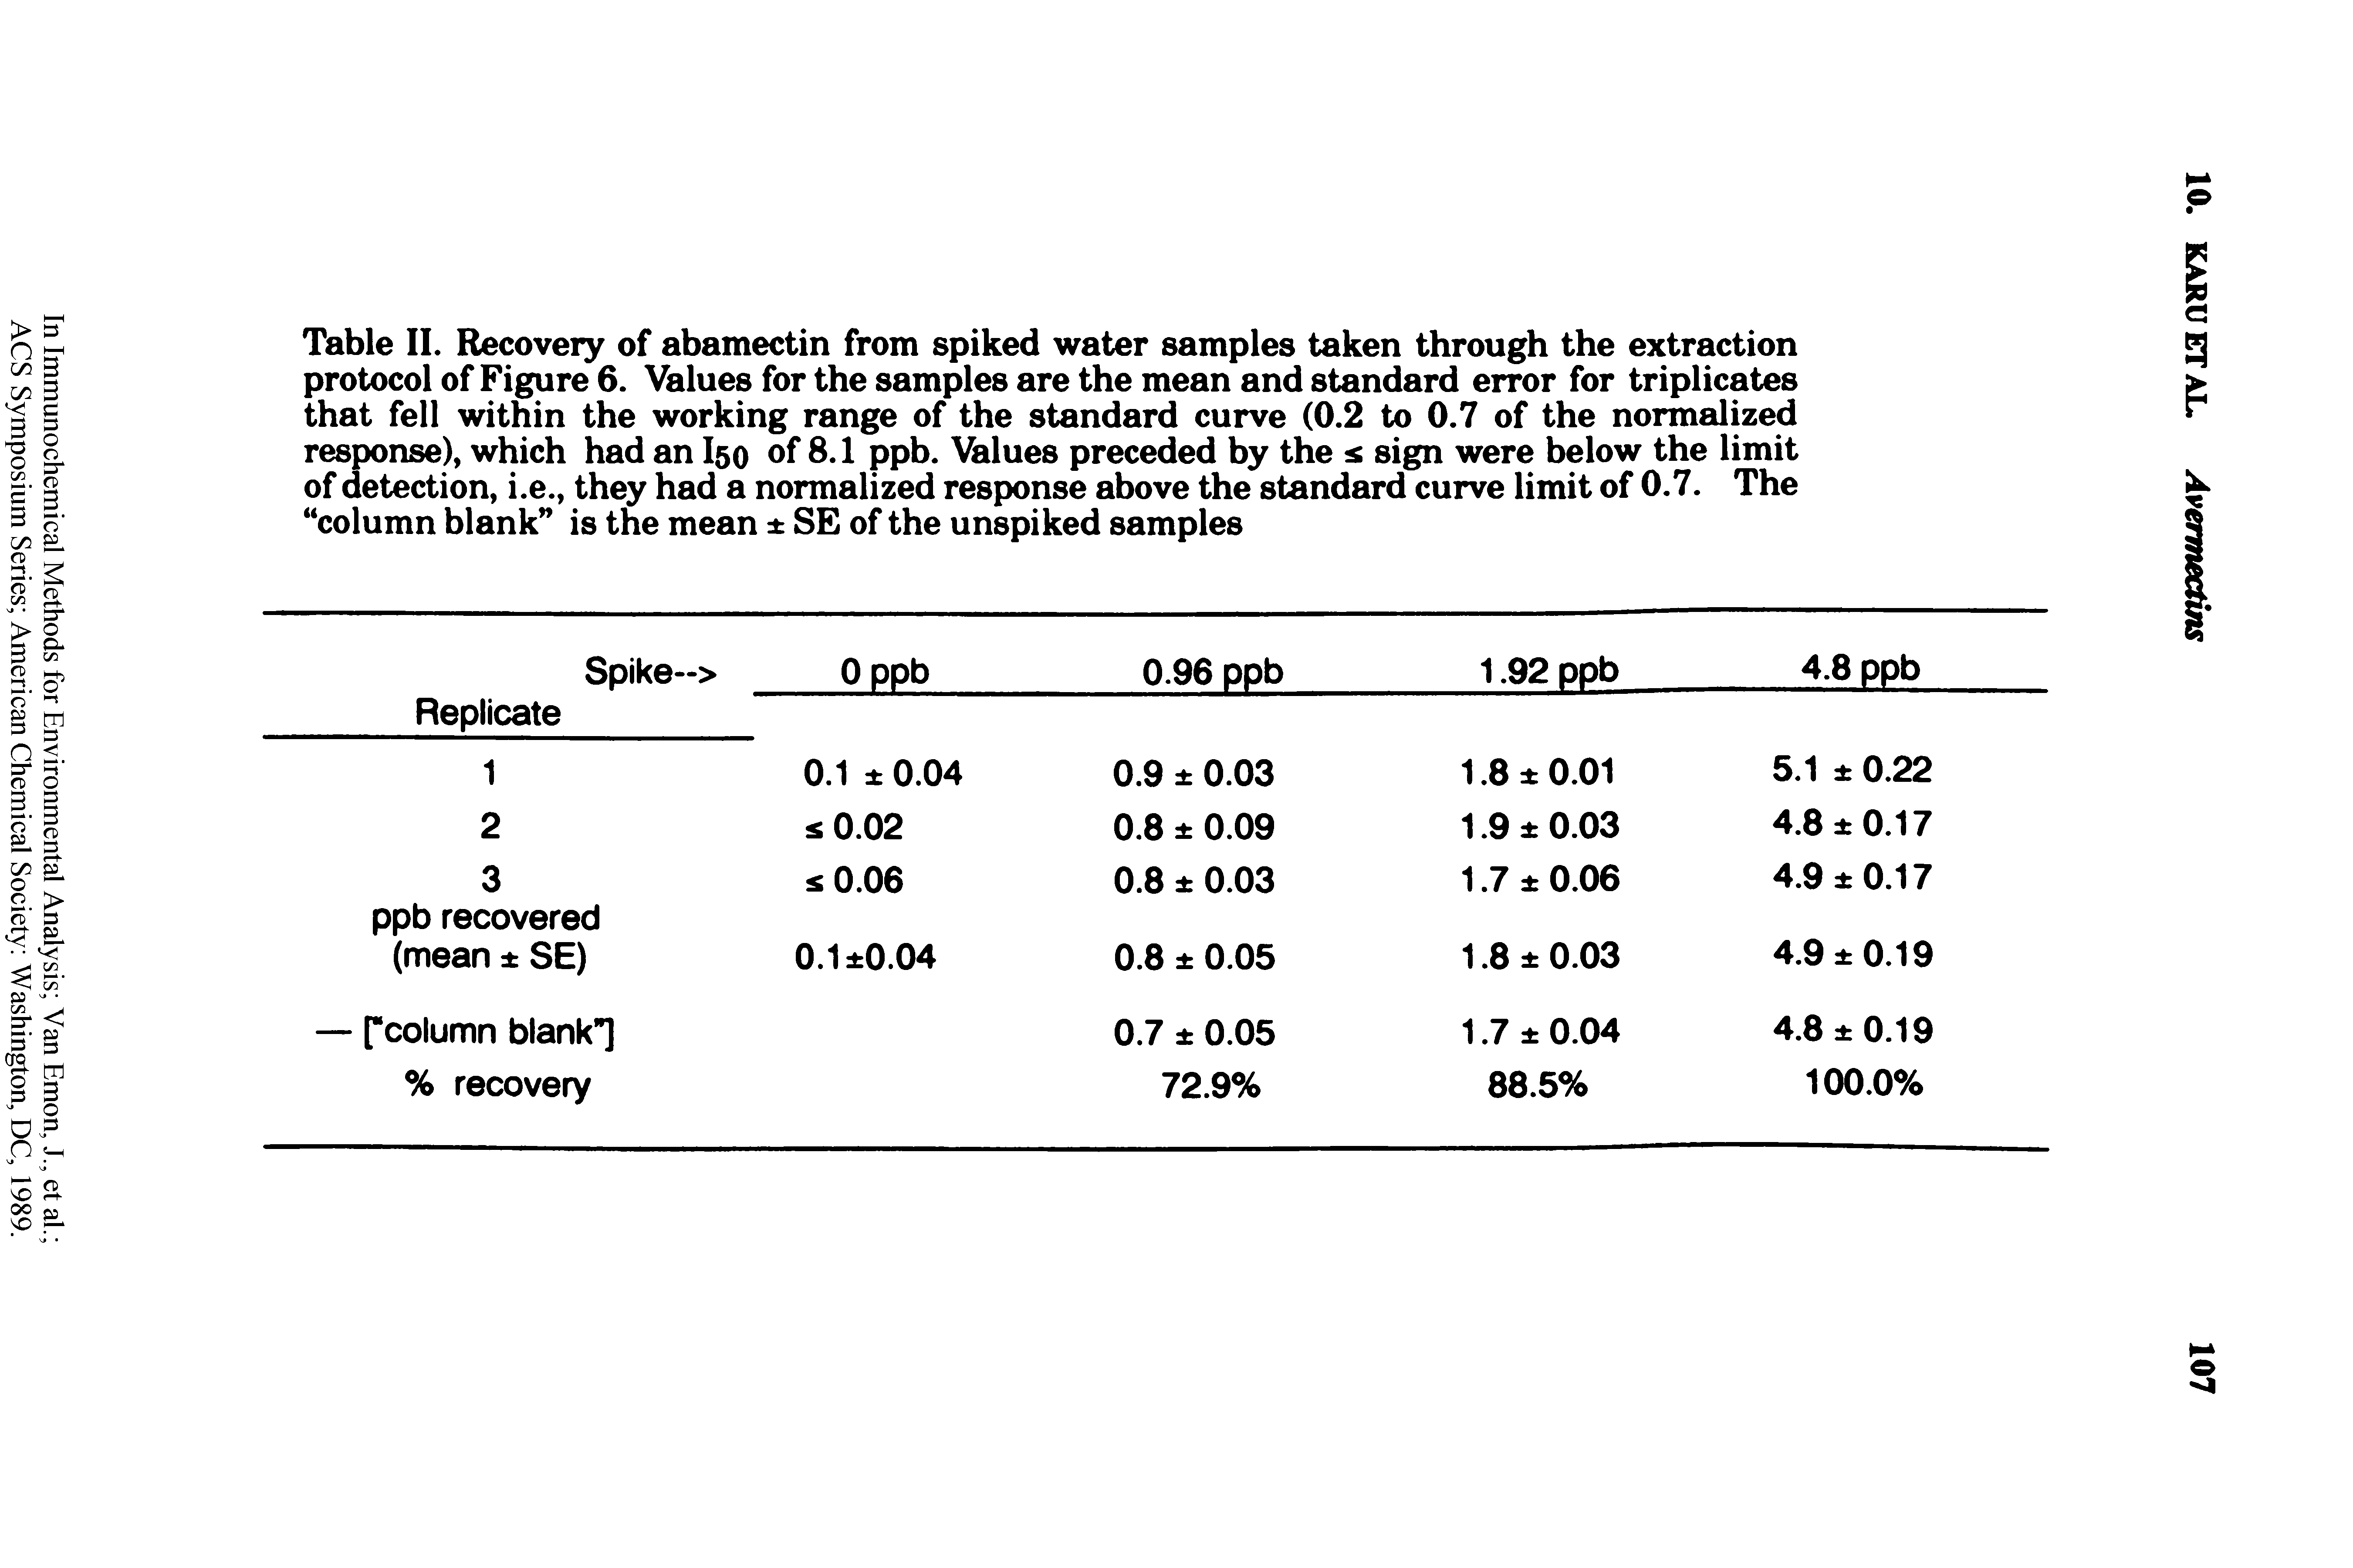 Table II. Recovery of abamectin from spiked water samples taken through the extraction protocol of Figure 6. Values for the samples are the mean and standard error for triplicates that fell within the working range of the standard curve (0.2 to 0.7 of the normalized response), which had an I50 of 8.1 ppb. Values preceded by the sign were below the limit of detection, i.e., they had a normalized response above the standard curve limit of 0.7. The column blank is the mean SE of the unspiked samples...